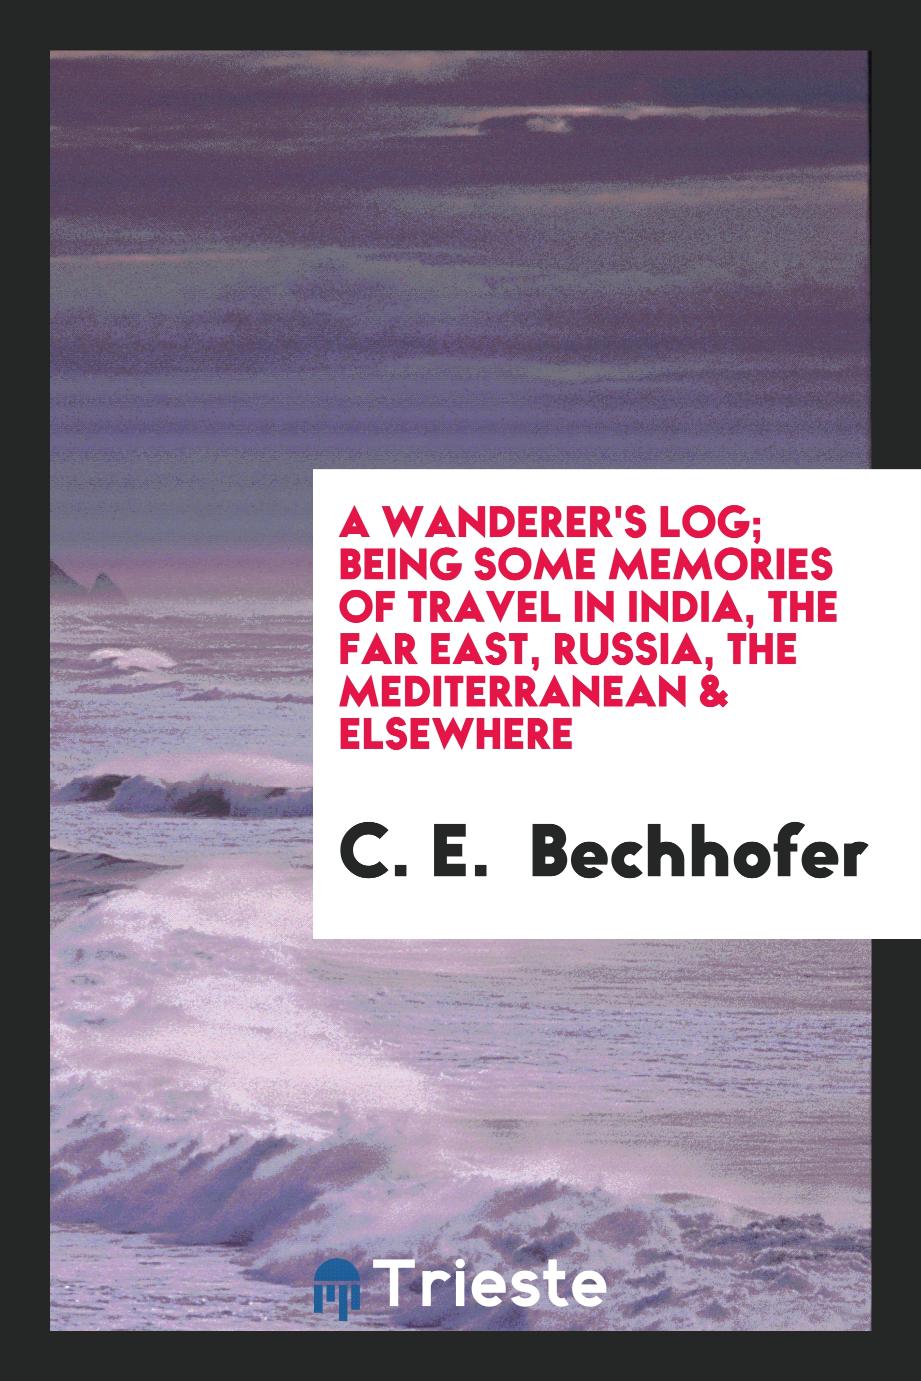 A wanderer's log; being some memories of travel in India, the Far East, Russia, the Mediterranean & elsewhere